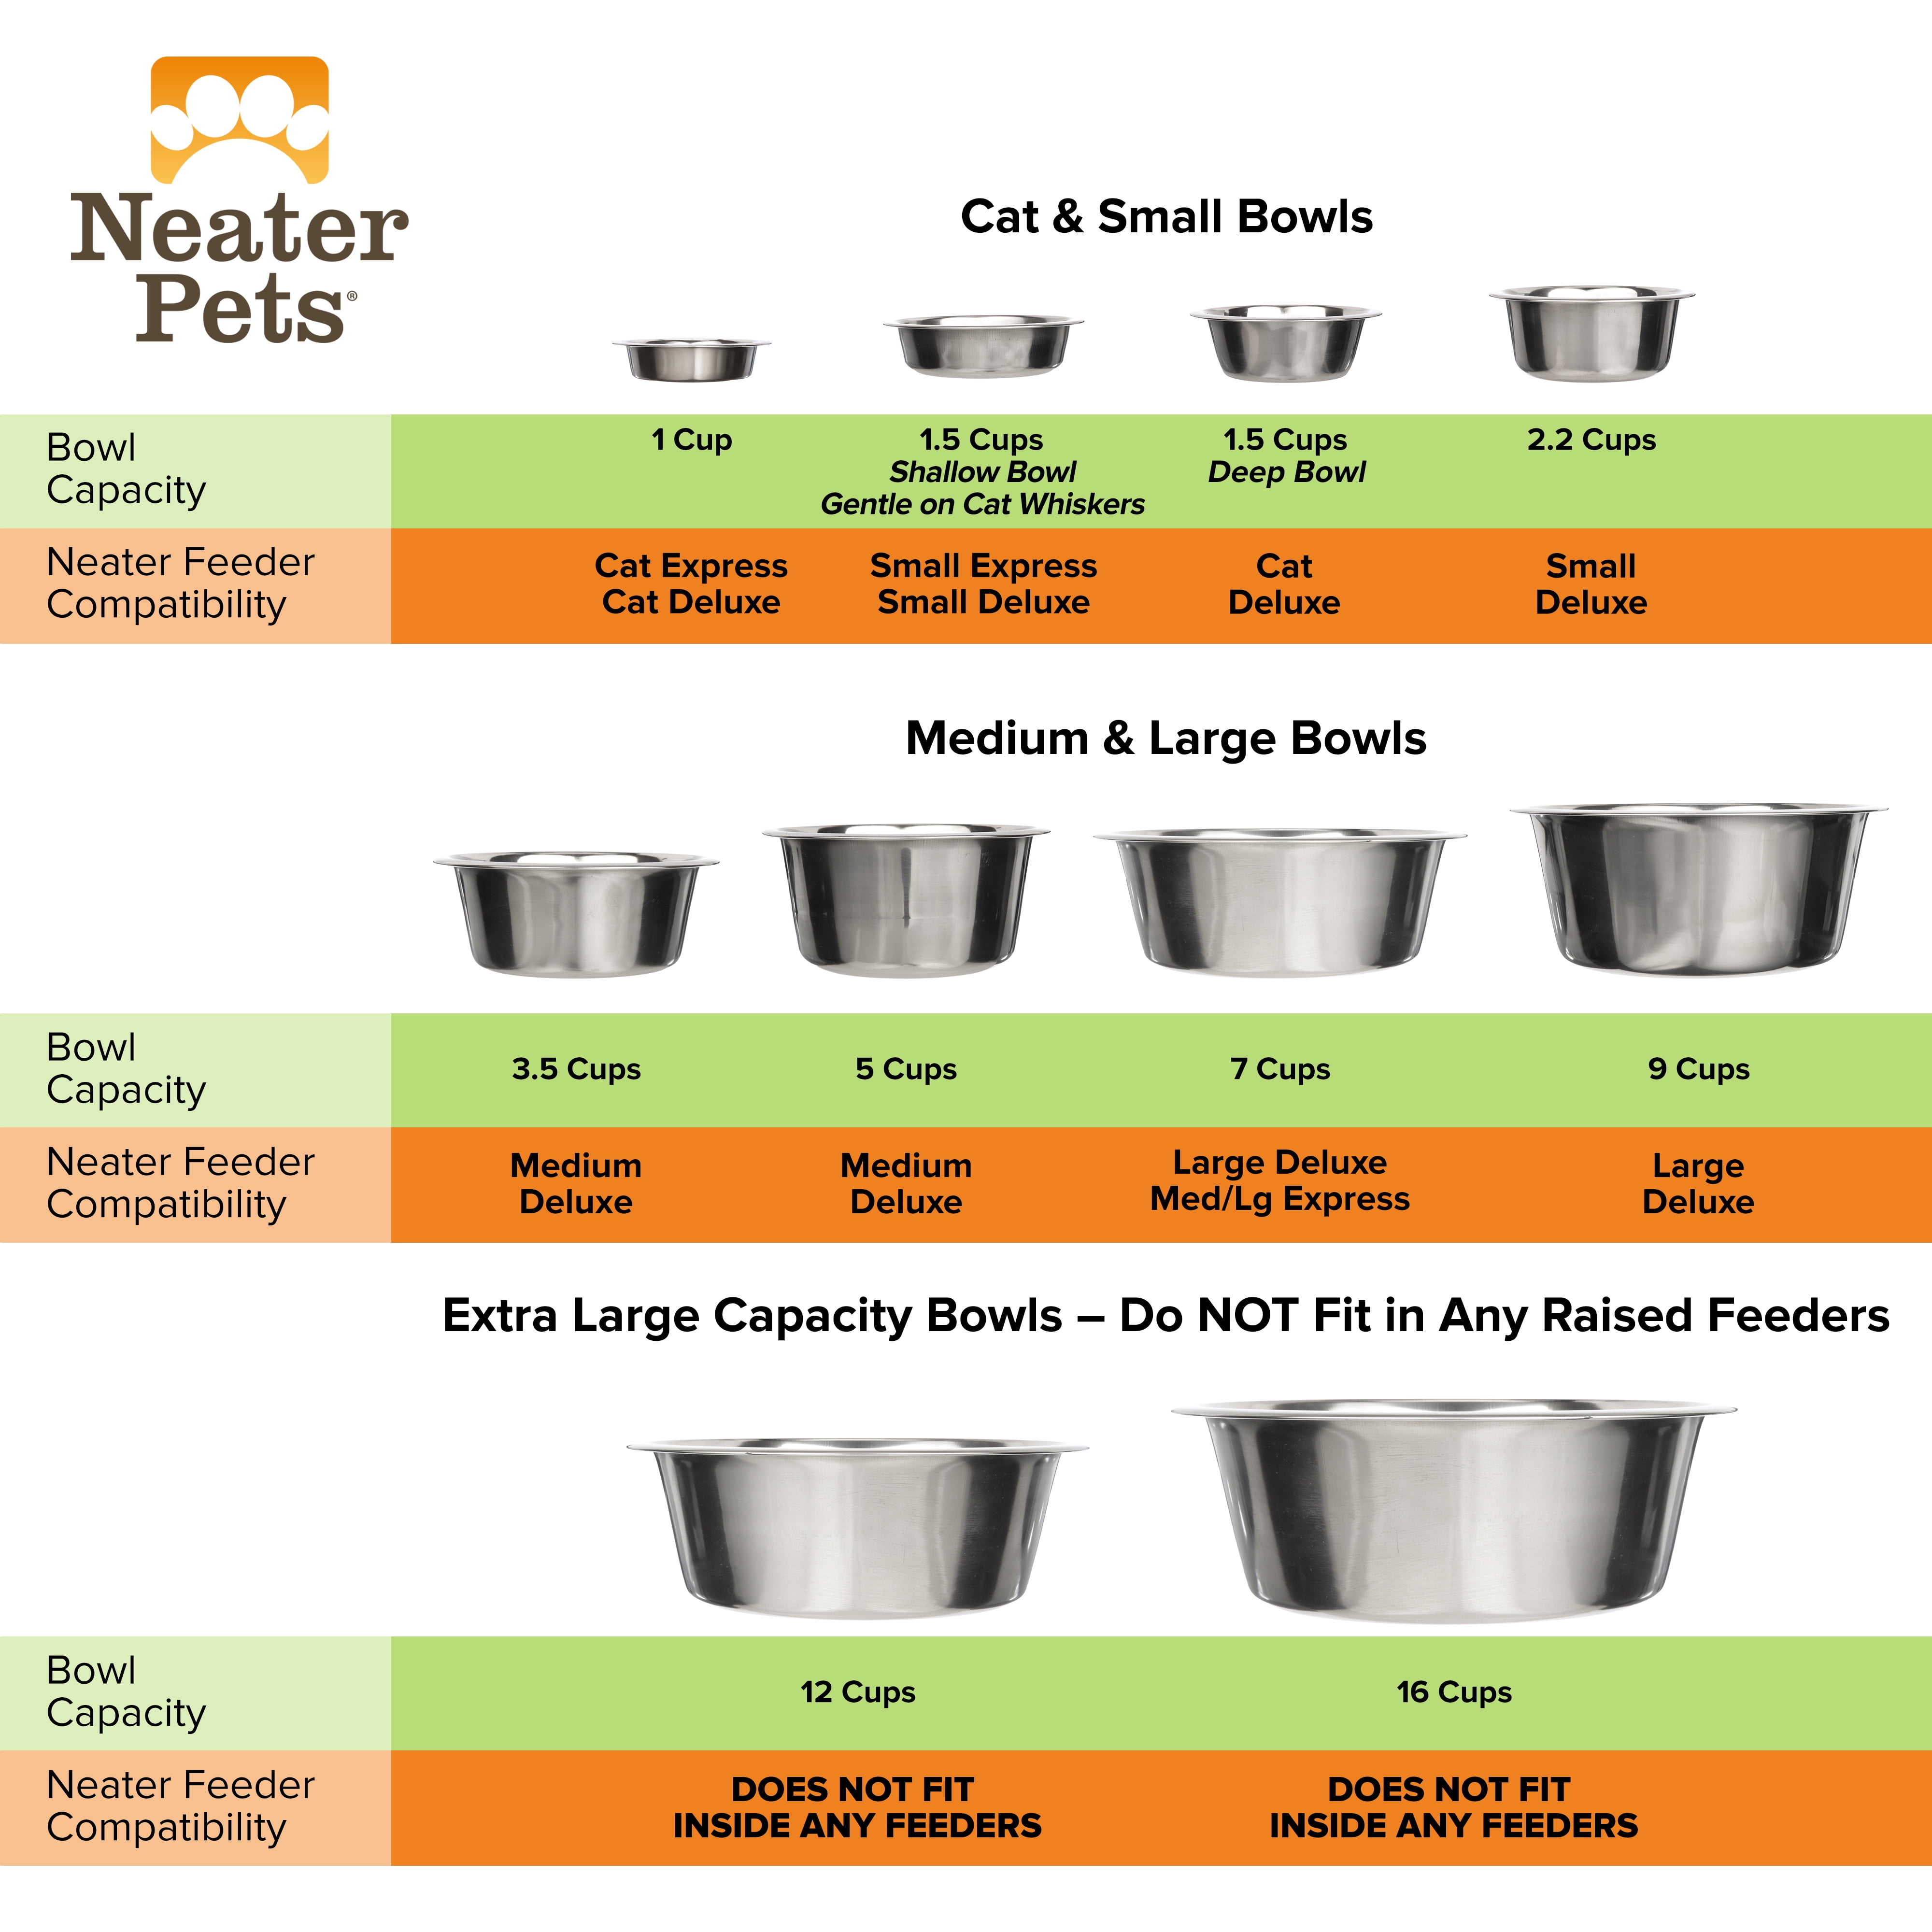 Neater Pet Brands Giant Bowl - Extra Large Water Bowl for Dogs (2.25 Gallon Capacity, 288 oz) - Aquamarine